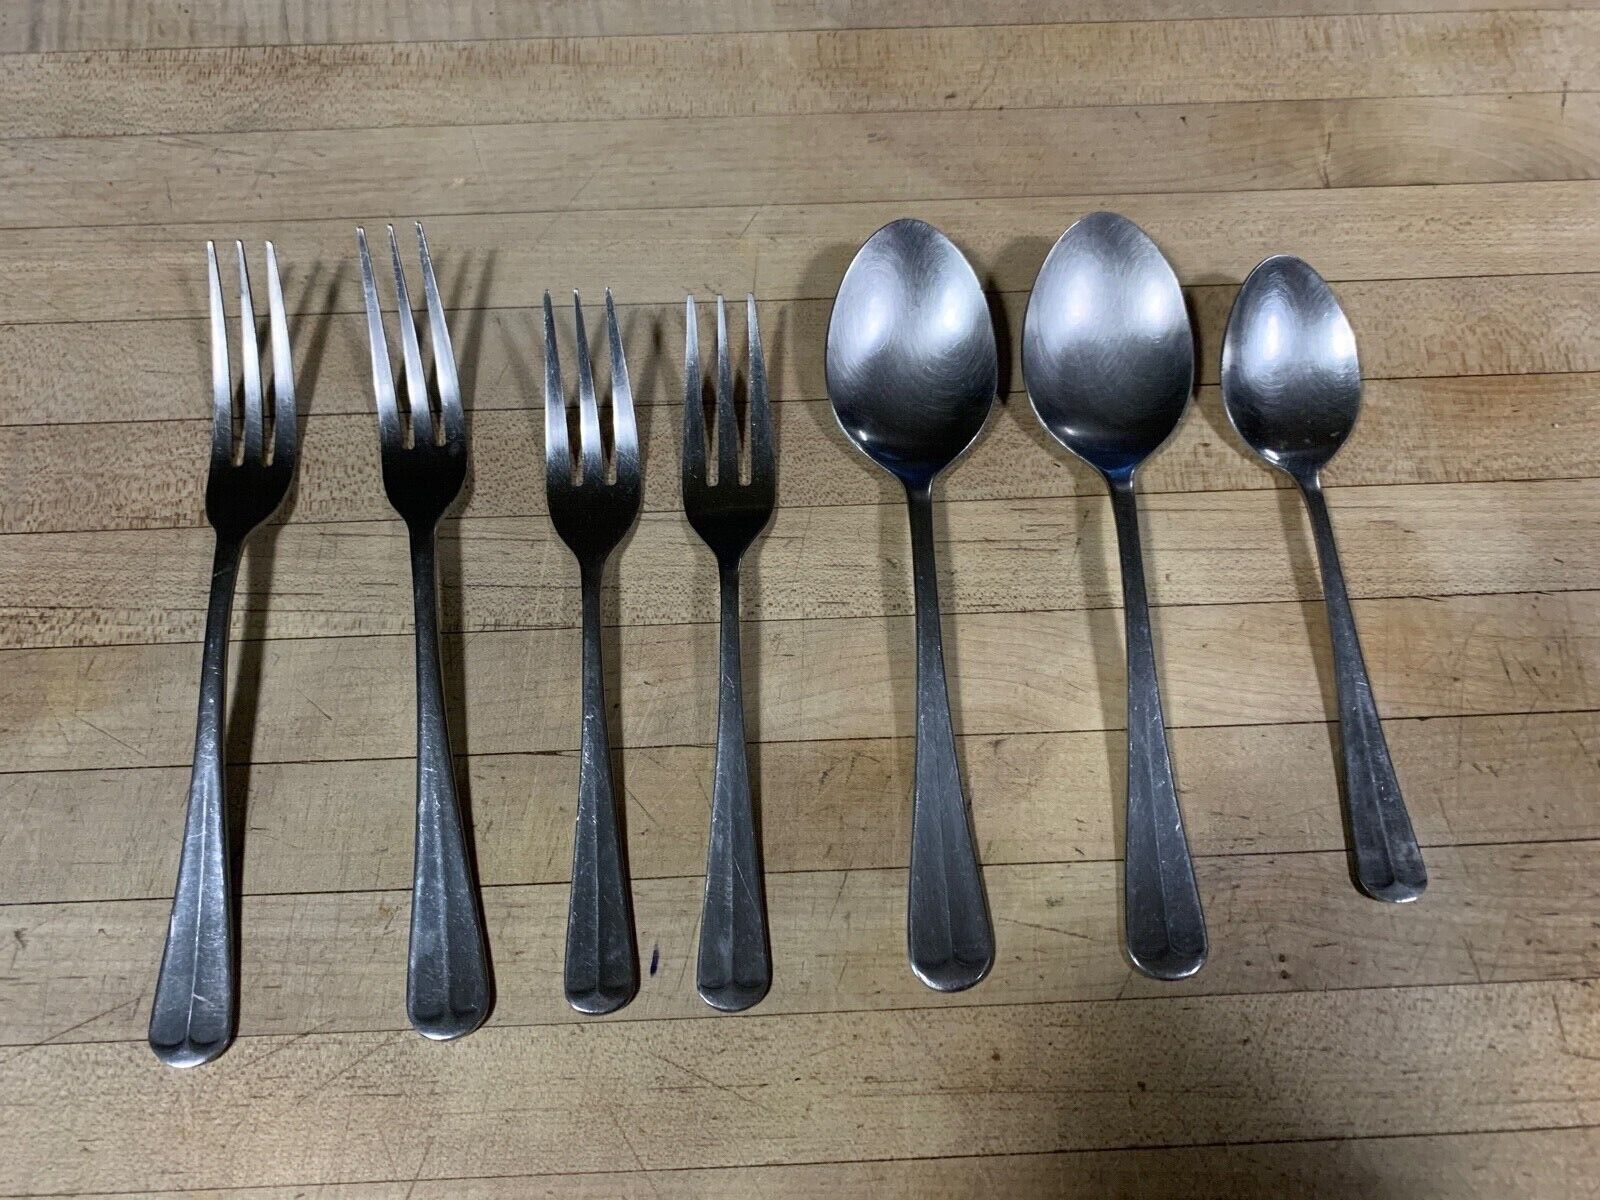 7 pieces Barclay Geneve Stainless Korea Oyster Bay Spoons & Forks